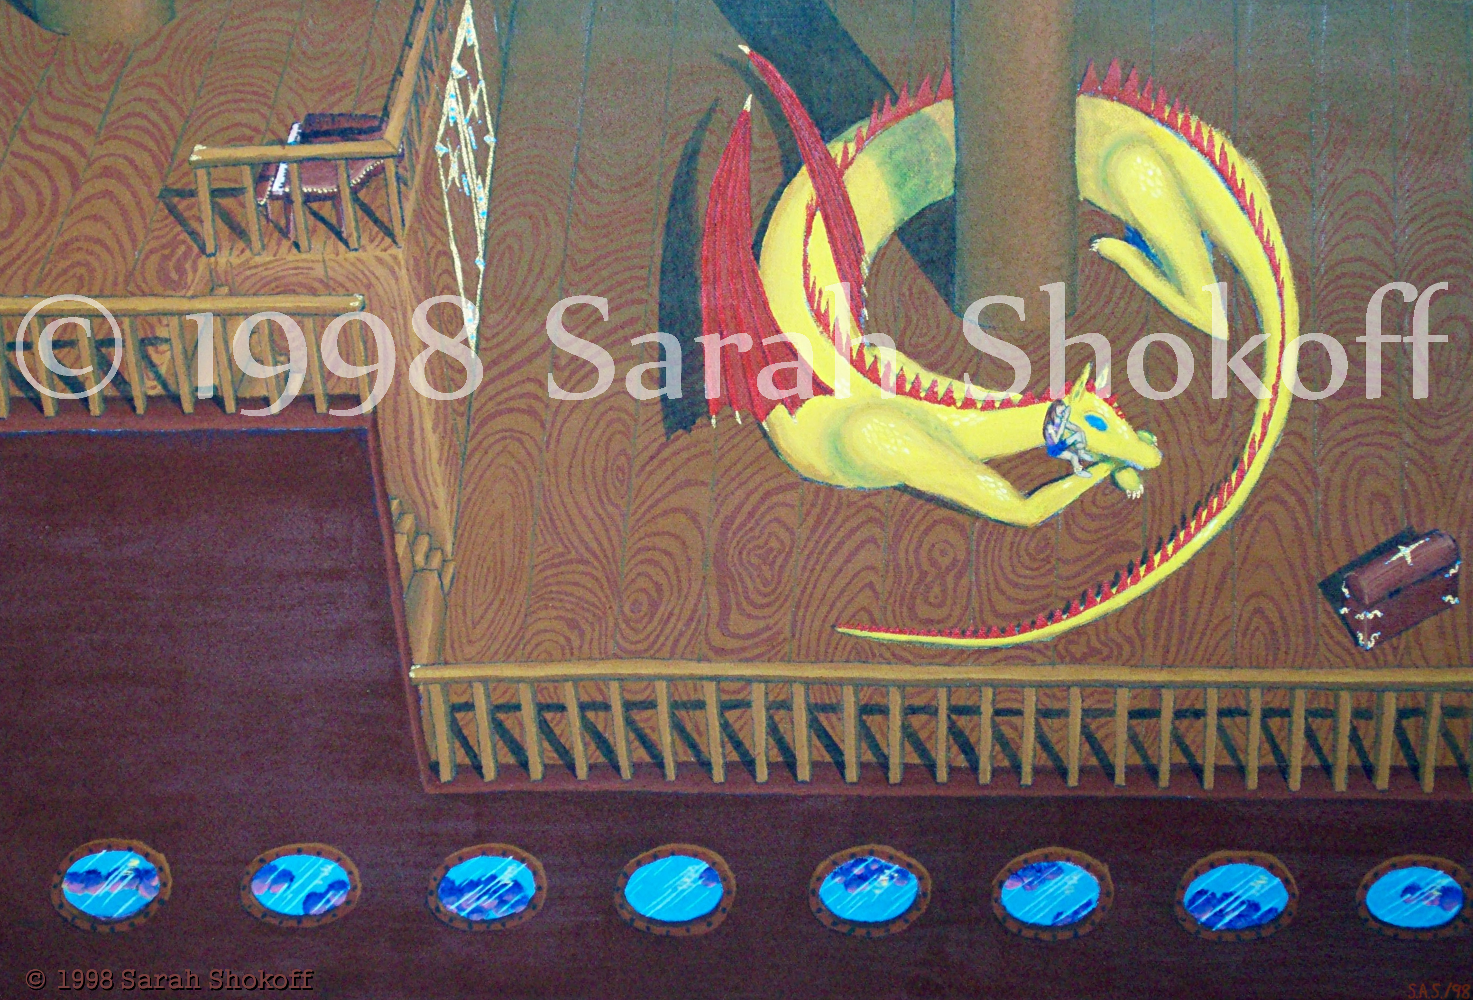 A human girl whispers in the ear of a giant yellow and red dragon. The dragon lies around the mast of a massive sailing ship. On the deck the broad planks show the whirls of the wood they were cut from. The deck is bordered by a wooden railing. Stairs lead up to a higher deck and a golden doorway marks the entranceway to below deck. While the ship is sized for the dragon a treasure chest and a piano proportionate to the human can be seen. Portholes line the bottom of the painting reflecting blue sky and the pink and blue hued clouds of a fantasy world.